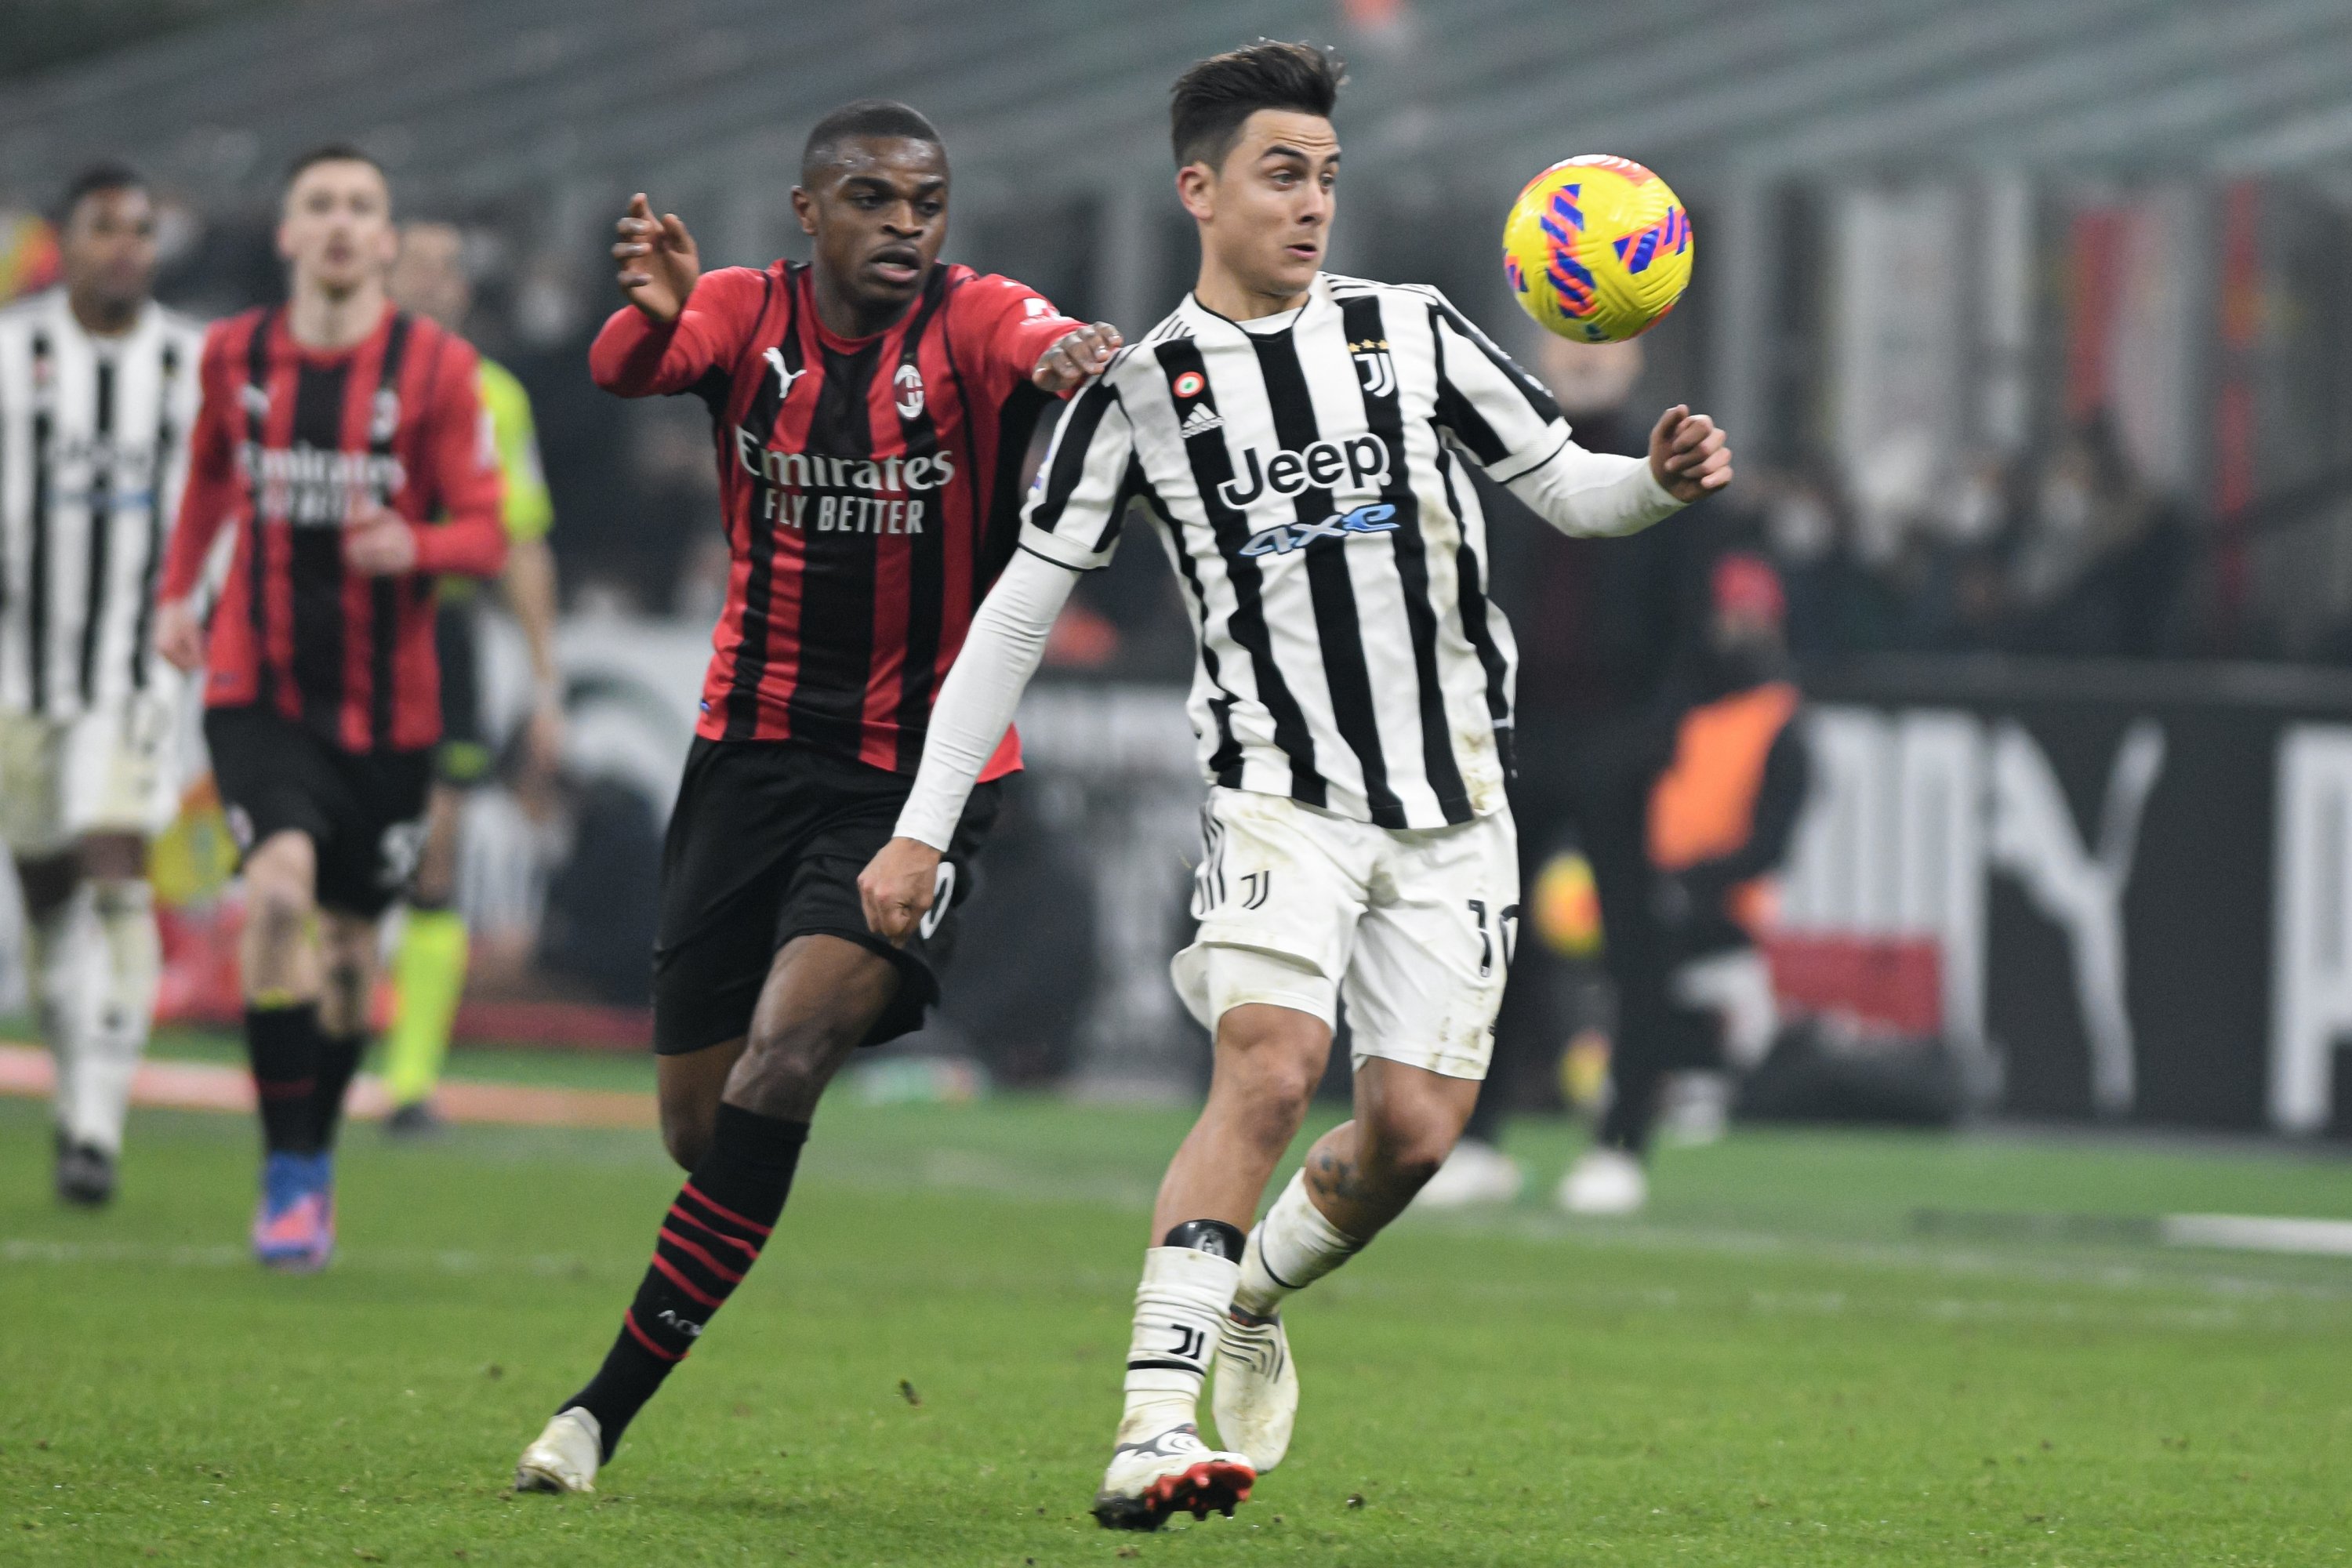 Serie A title chaser Milan loses ground to Napoli after Juve draw